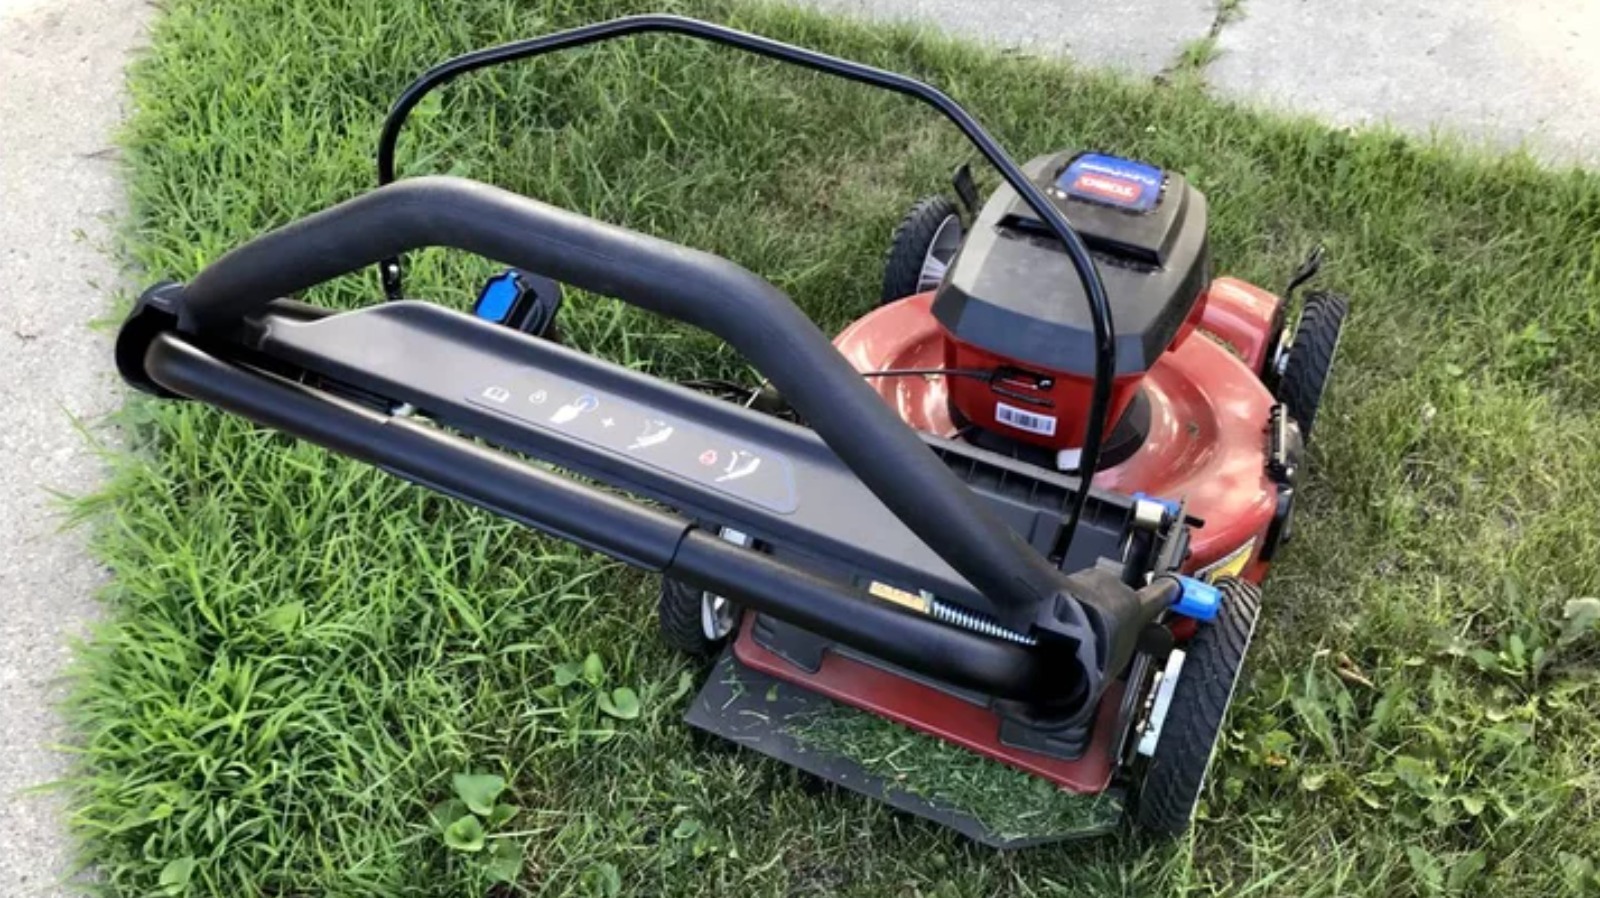 Toro Smartstow Recycler 22 Inch 60V MAX Electric Lawn Mower Review